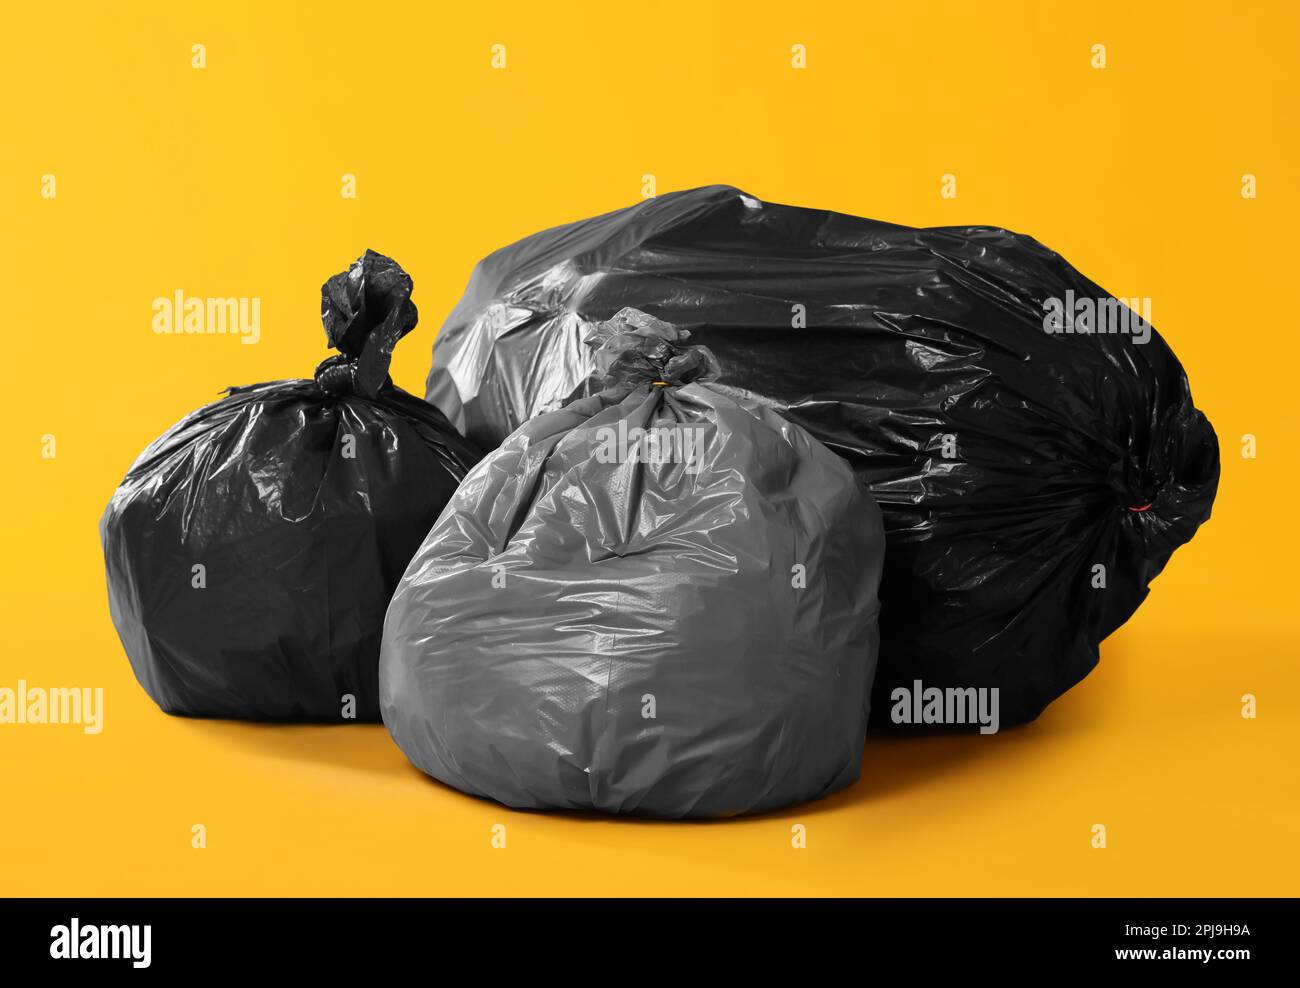 https://c8.alamy.com/comp/2PJ9H9A/trash-bags-full-of-garbage-on-yellow-background-2PJ9H9A.jpg